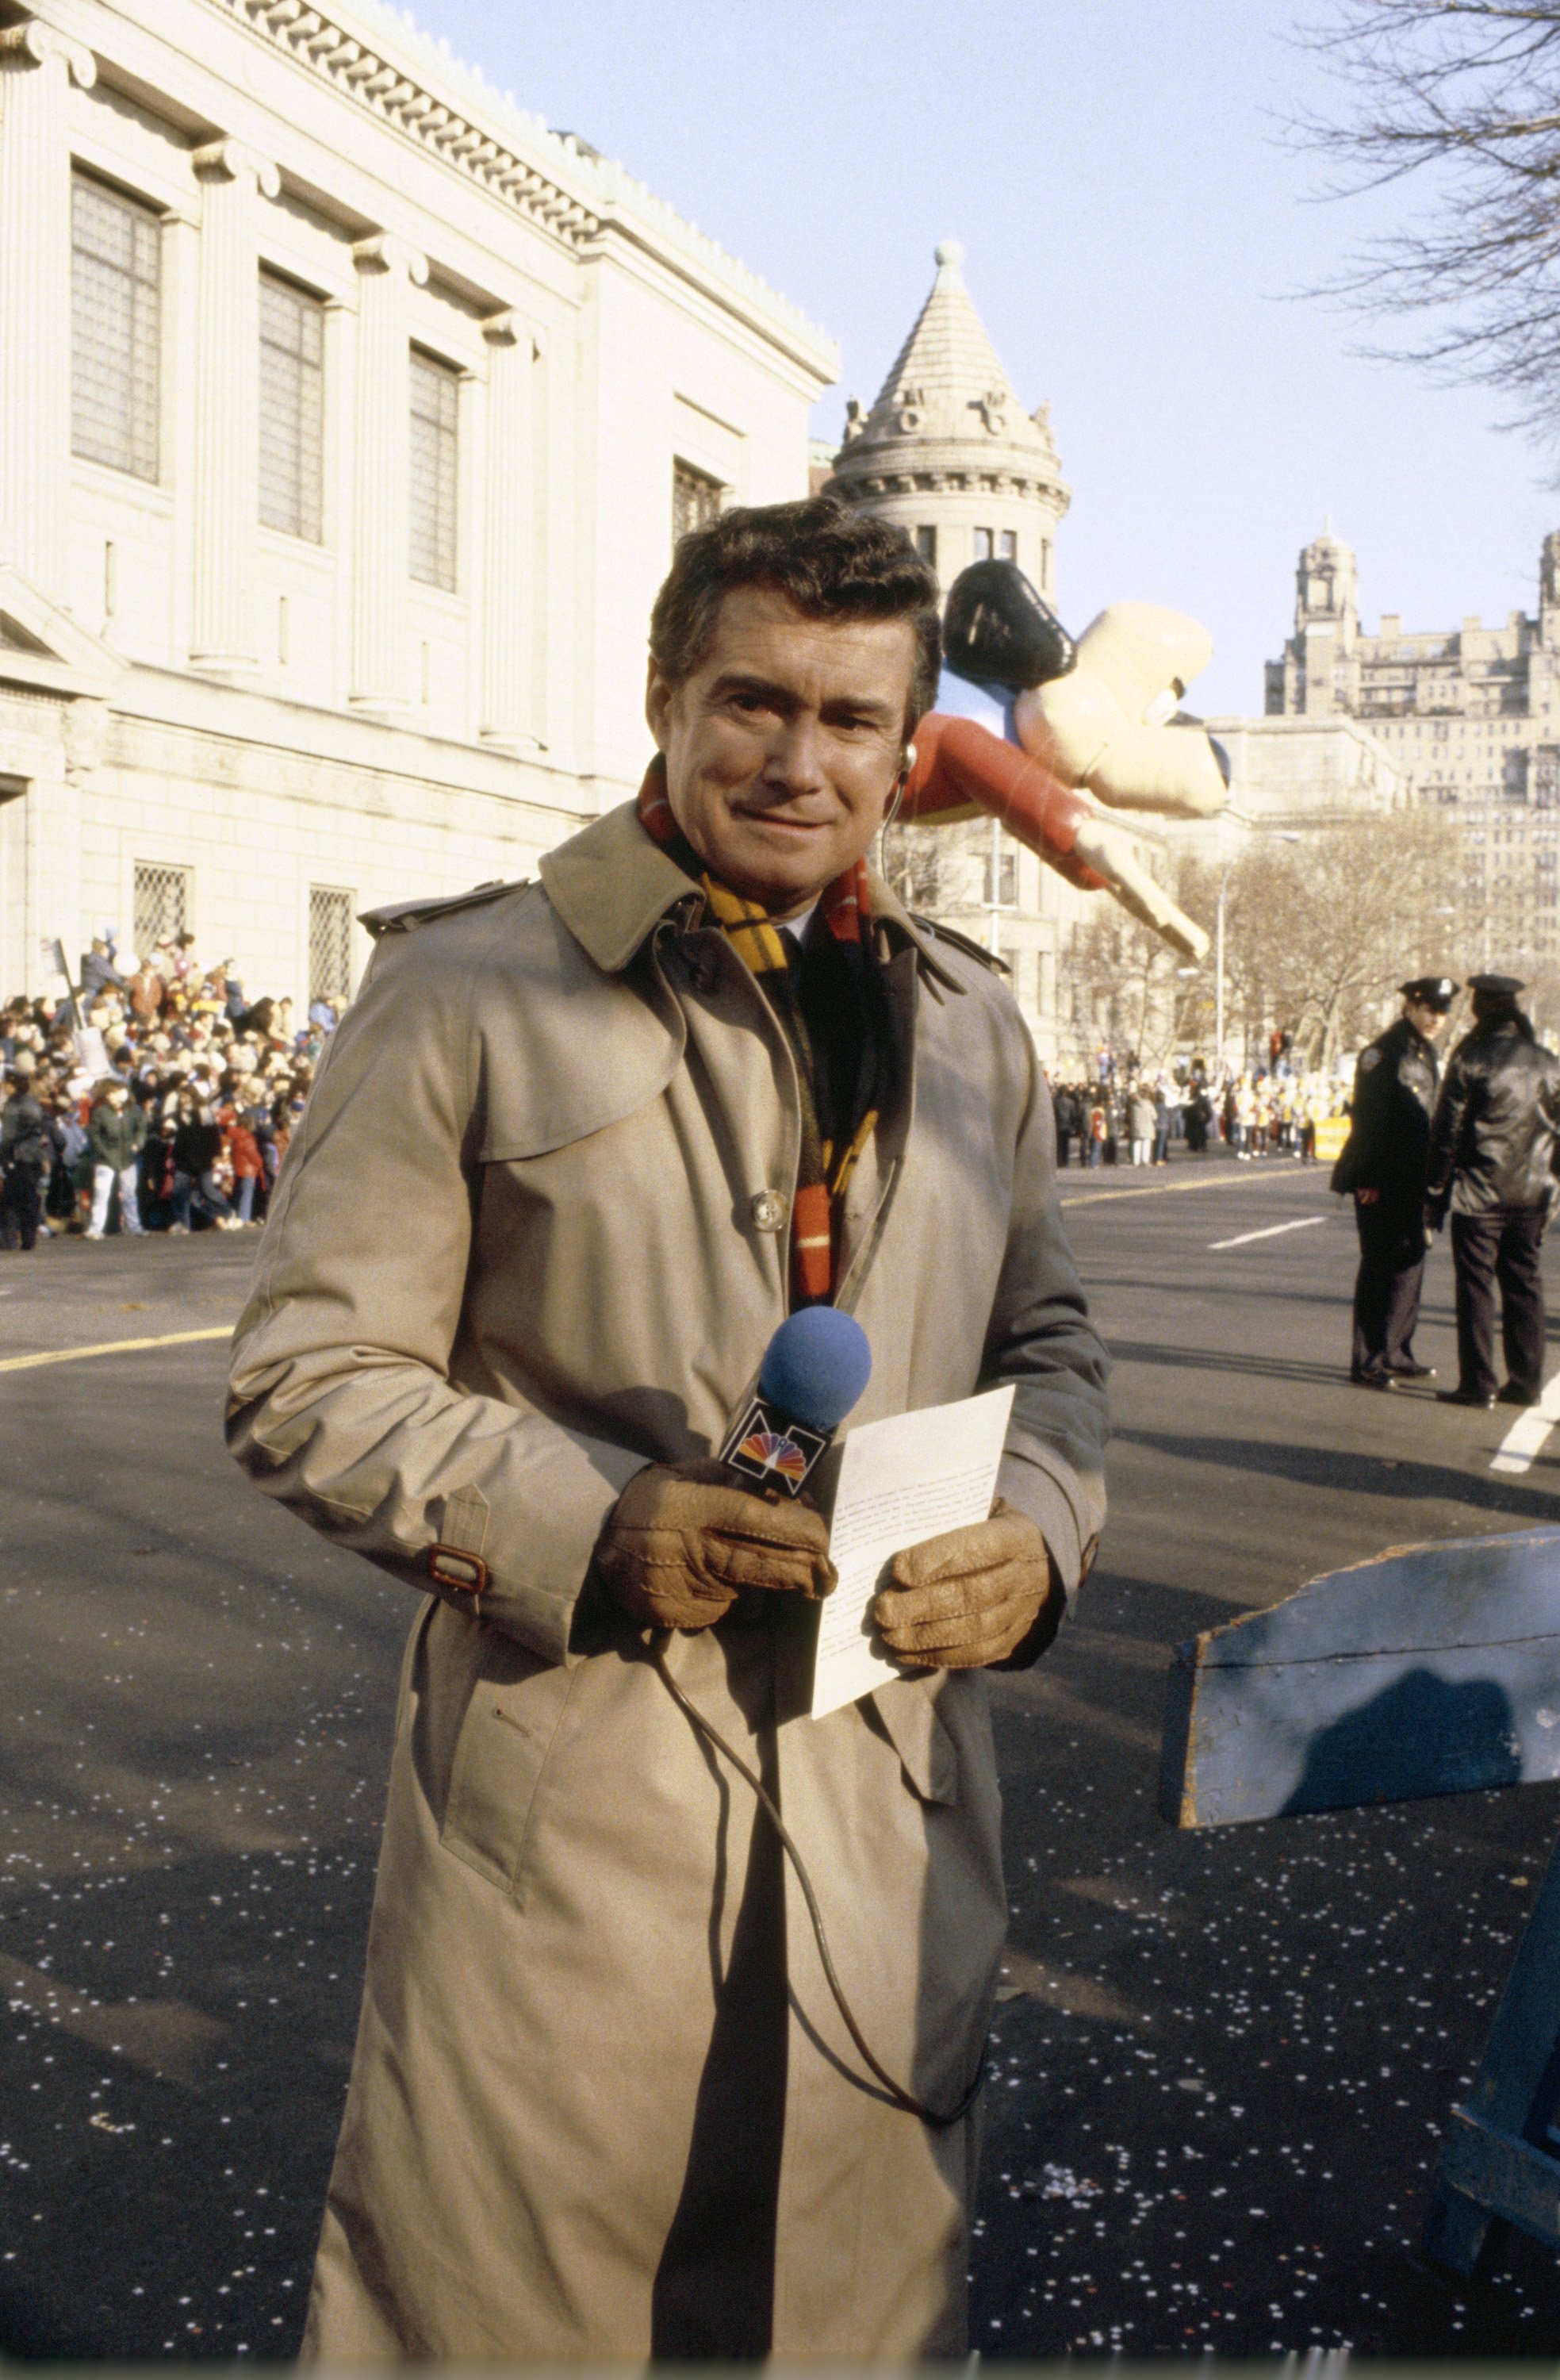 Regis Philbin ready to host the 1981 Macy's Thanksgiving Day Parade | Source: Getty Images